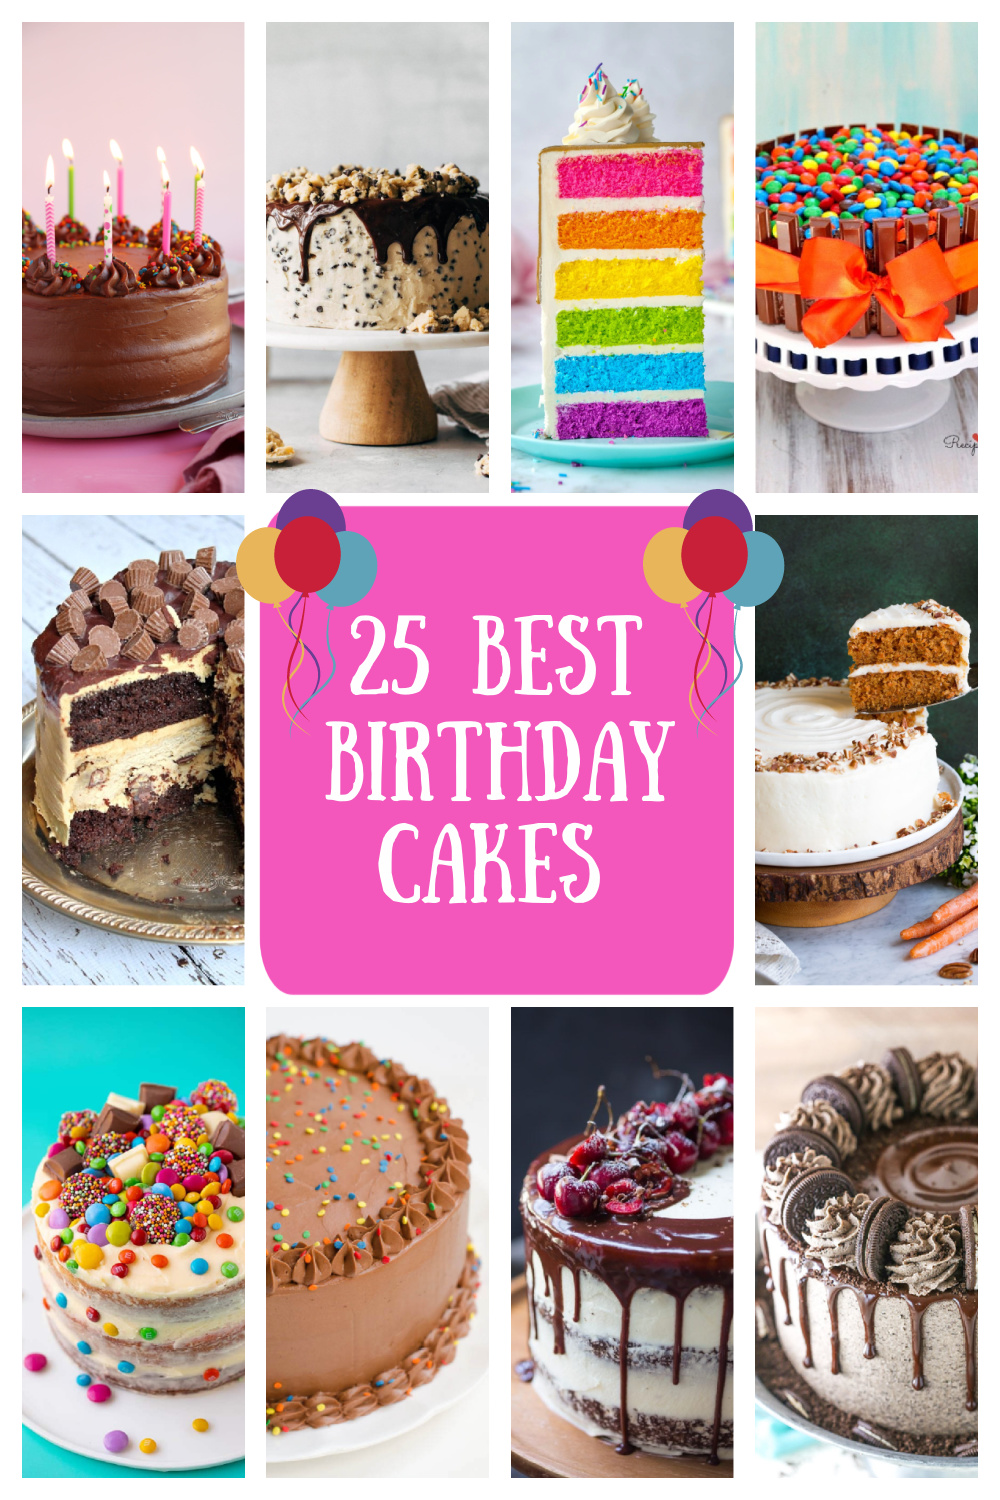 III. Factors to Consider When Selecting a Birthday Cake